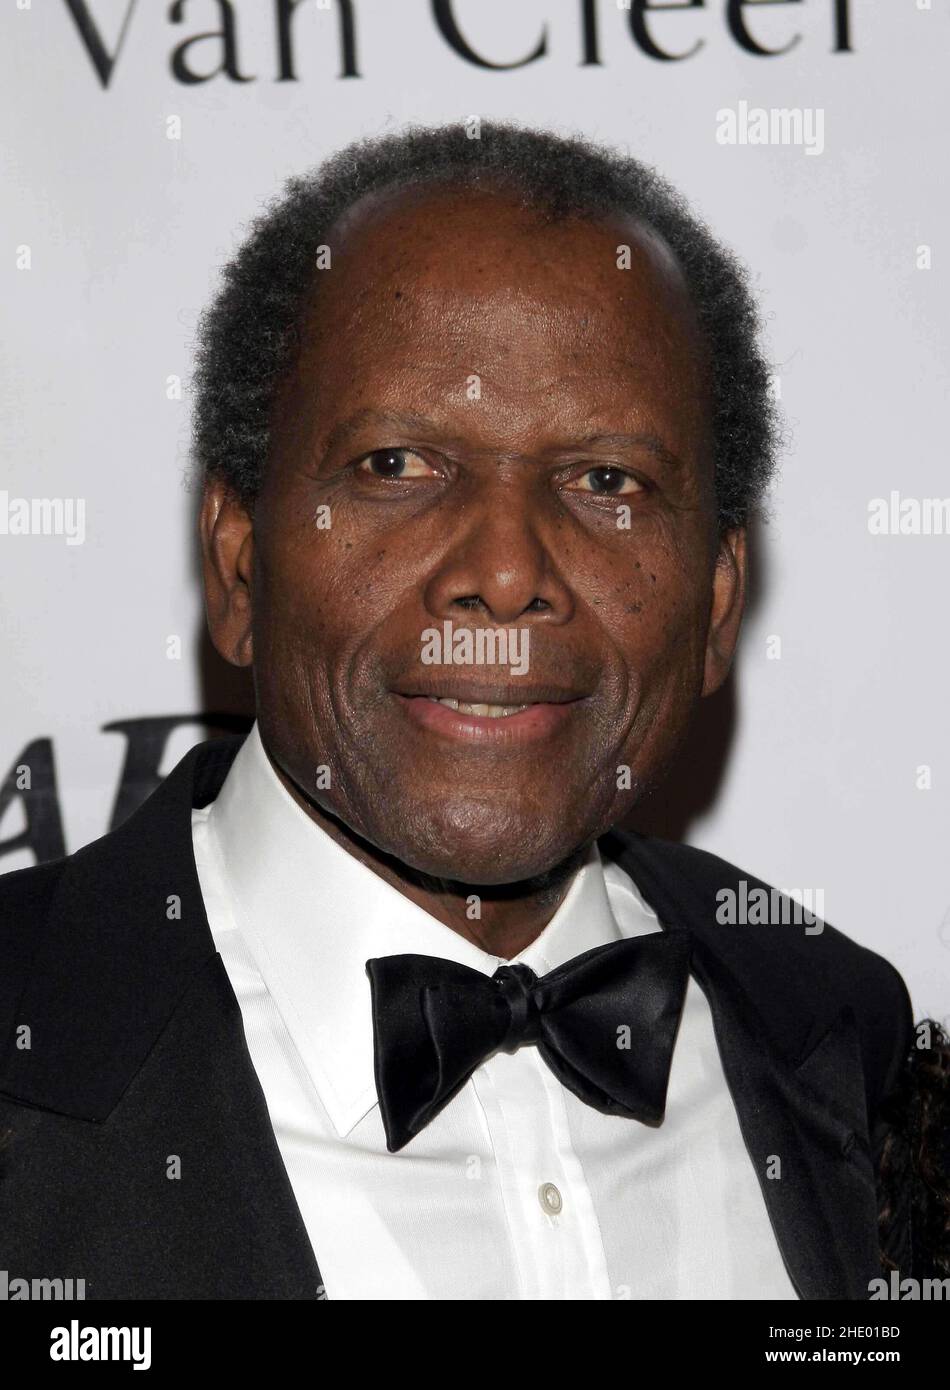 23 October 2004 - Beverly Hills, California - Sidney Poitier. 16th Annual Carousel Of Hope Gala Presented By Mercedes-Benz  at the Beverly Hilton Hotel.  Photo Credit: Giulio Marcocchi/Sipa Press/CarouselofHope.074/0410250440 Stock Photo